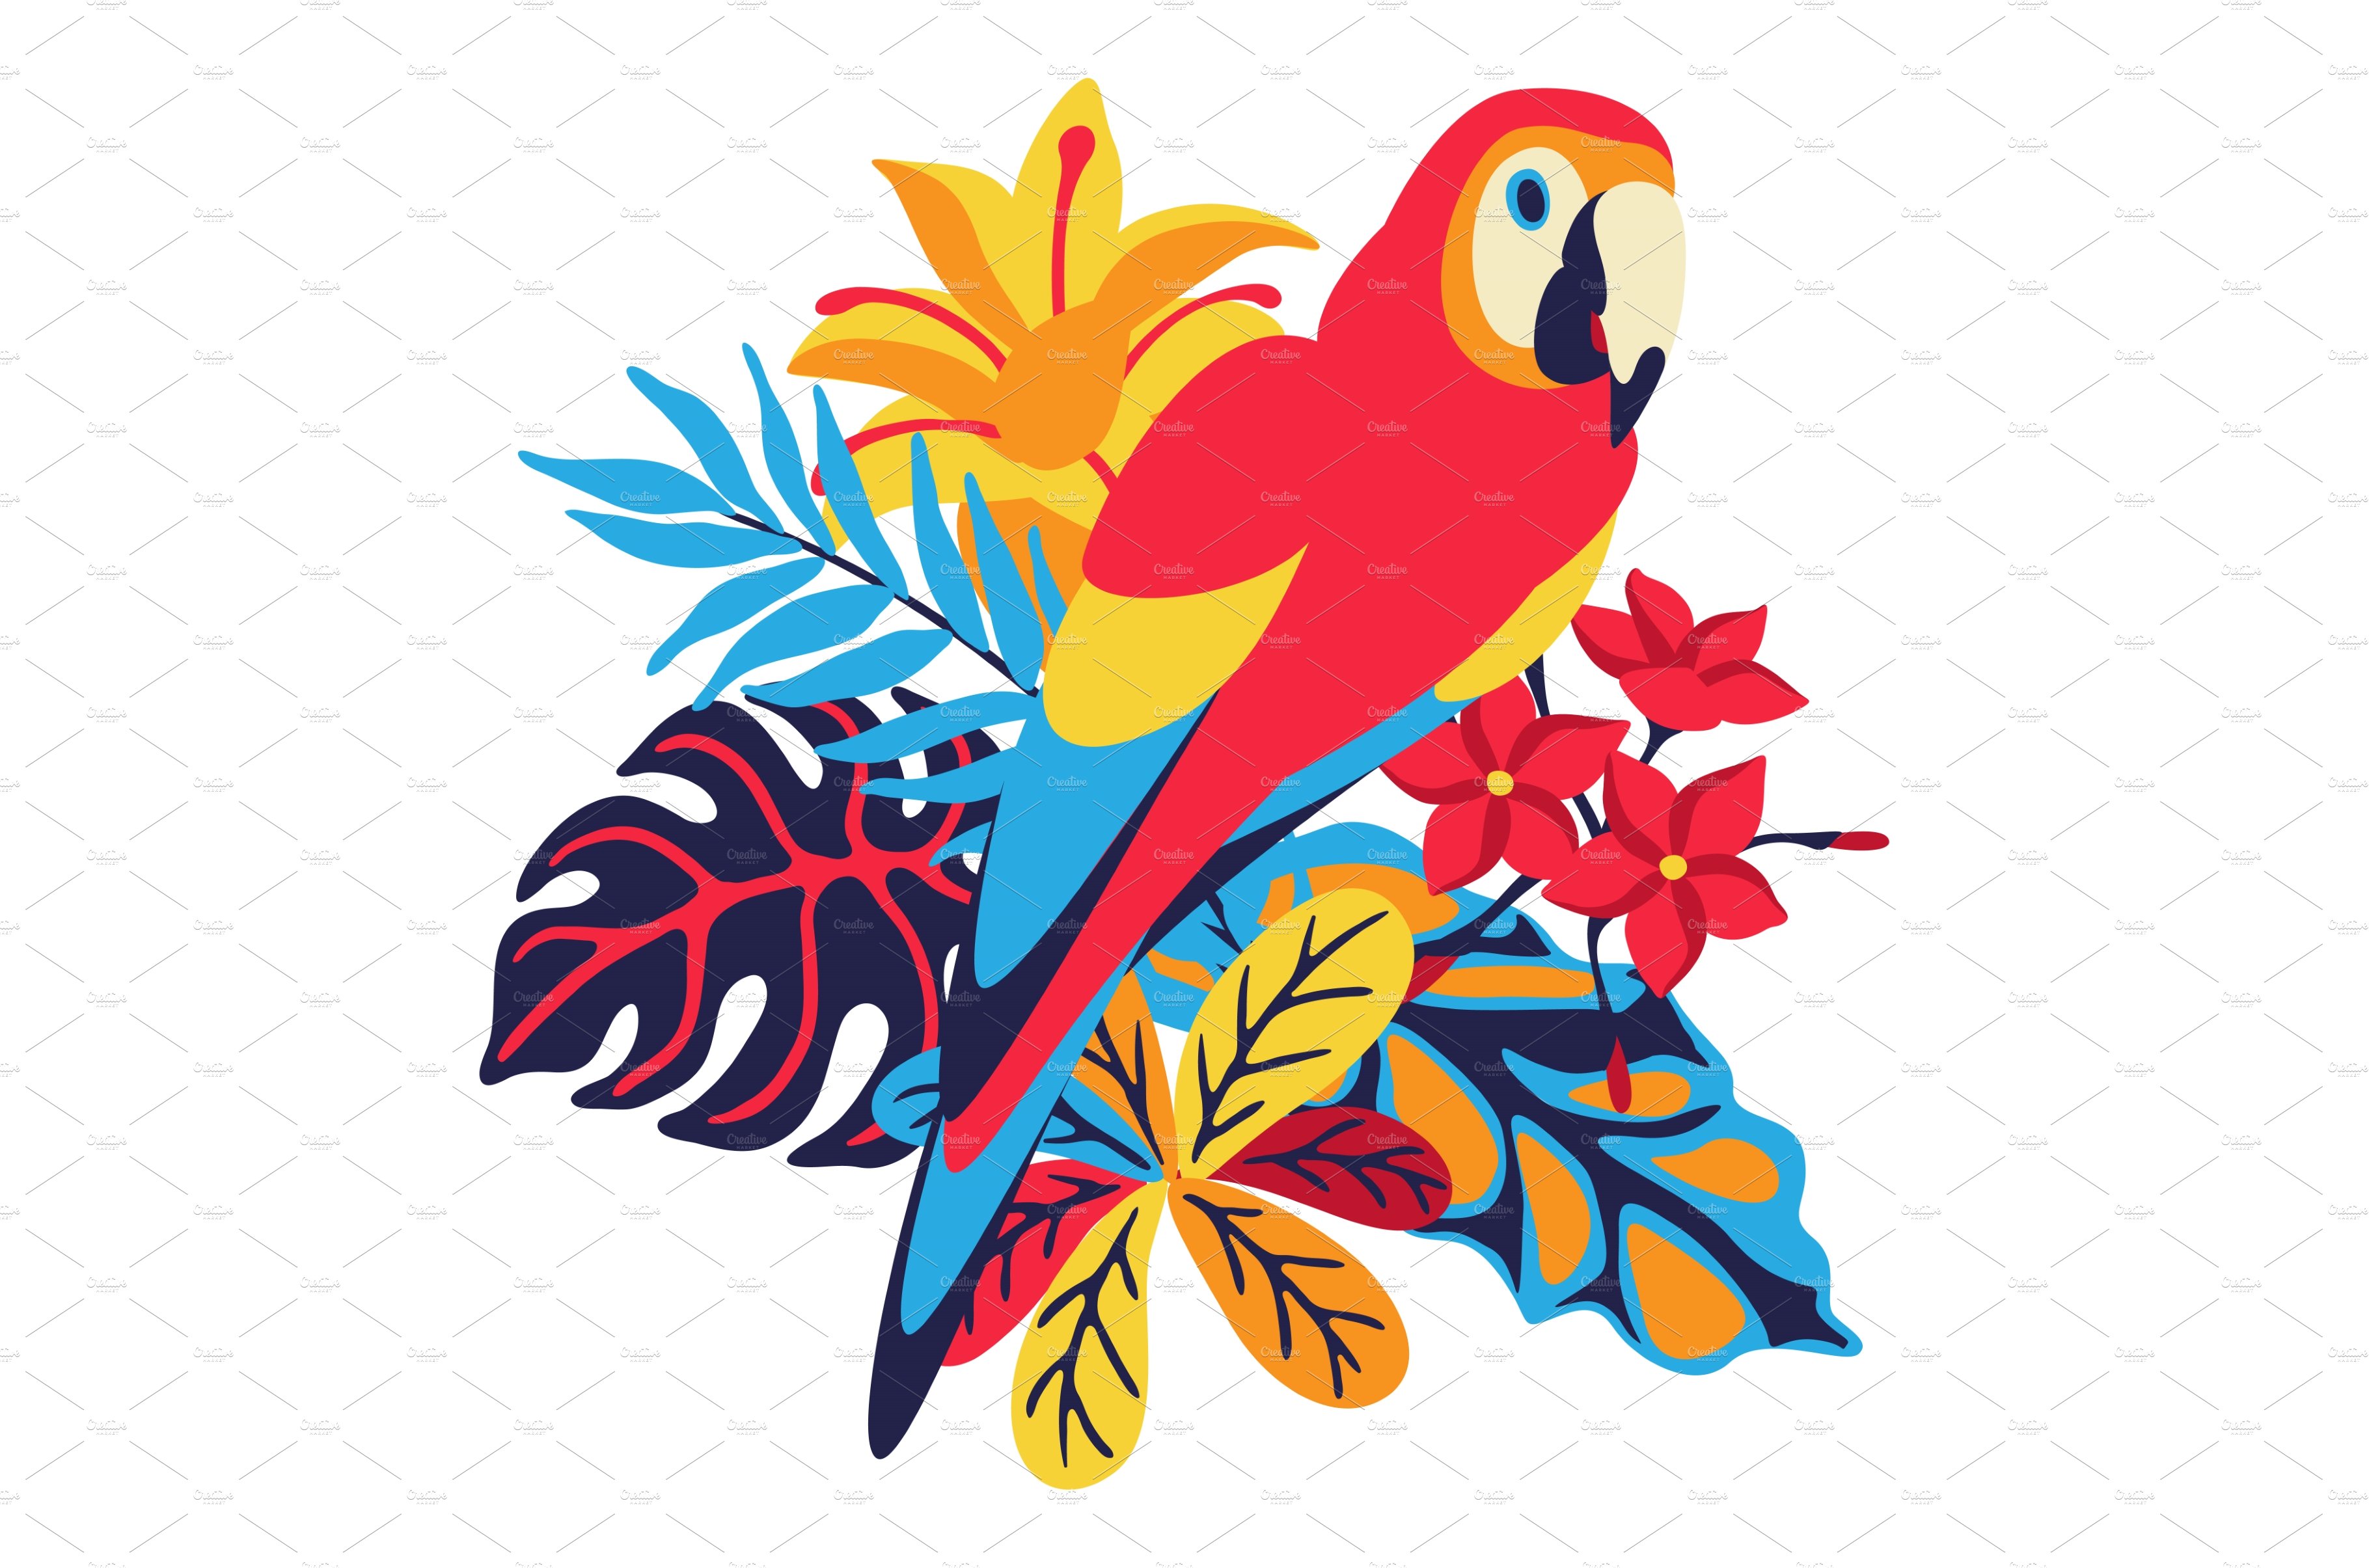 Illustration of macaw parrot with cover image.